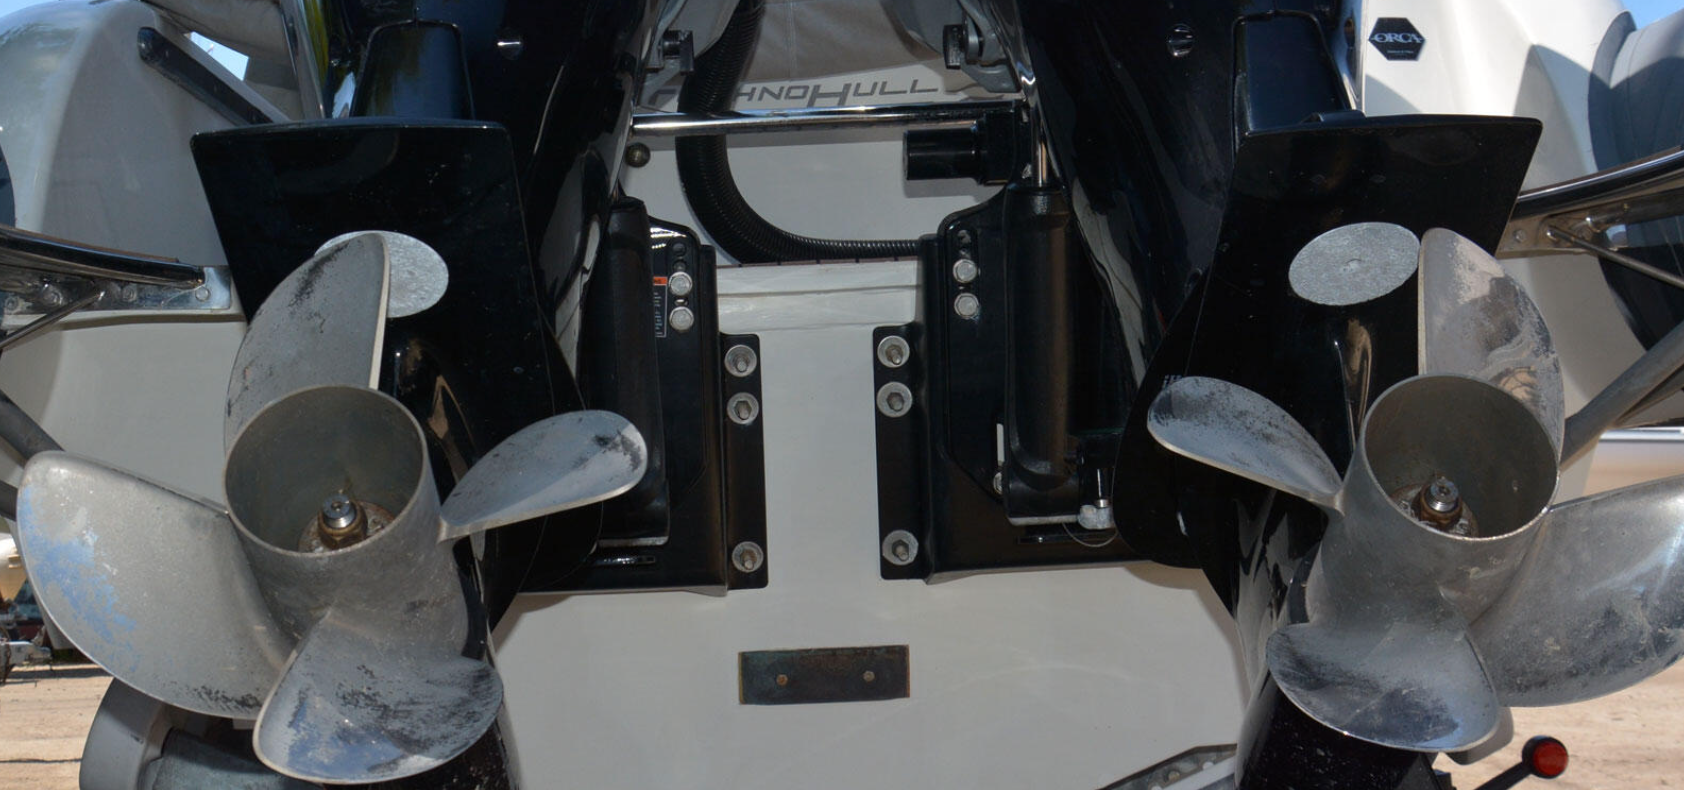 Twin outboards, transom, tiebar, sacrifical anodes